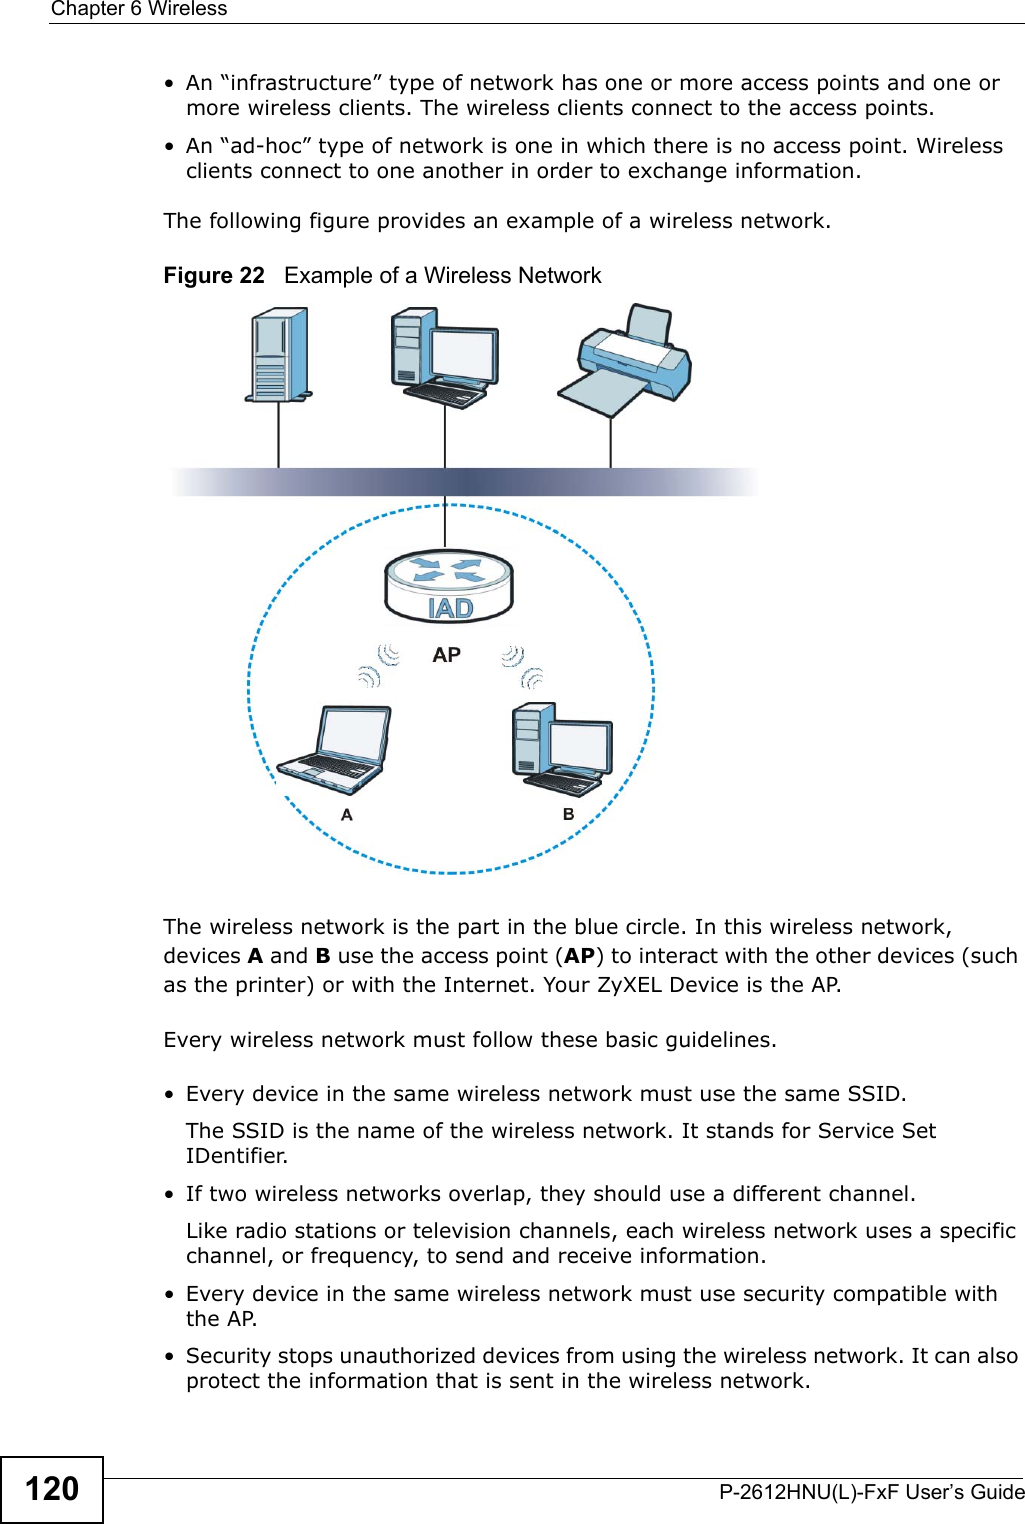 Chapter 6 WirelessP-2612HNU(L)-FxF User’s Guide120• An “infrastructure” type of network has one or more access points and one or more wireless clients. The wireless clients connect to the access points.• An “ad-hoc” type of network is one in which there is no access point. Wireless clients connect to one another in order to exchange information.The following figure provides an example of a wireless network.Figure 22   Example of a Wireless NetworkThe wireless network is the part in the blue circle. In this wireless network, devices A and B use the access point (AP) to interact with the other devices (such as the printer) or with the Internet. Your ZyXEL Device is the AP.Every wireless network must follow these basic guidelines.• Every device in the same wireless network must use the same SSID.The SSID is the name of the wireless network. It stands for Service Set IDentifier.• If two wireless networks overlap, they should use a different channel.Like radio stations or television channels, each wireless network uses a specificchannel, or frequency, to send and receive information.• Every device in the same wireless network must use security compatible with the AP.• Security stops unauthorized devices from using the wireless network. It can alsoprotect the information that is sent in the wireless network.